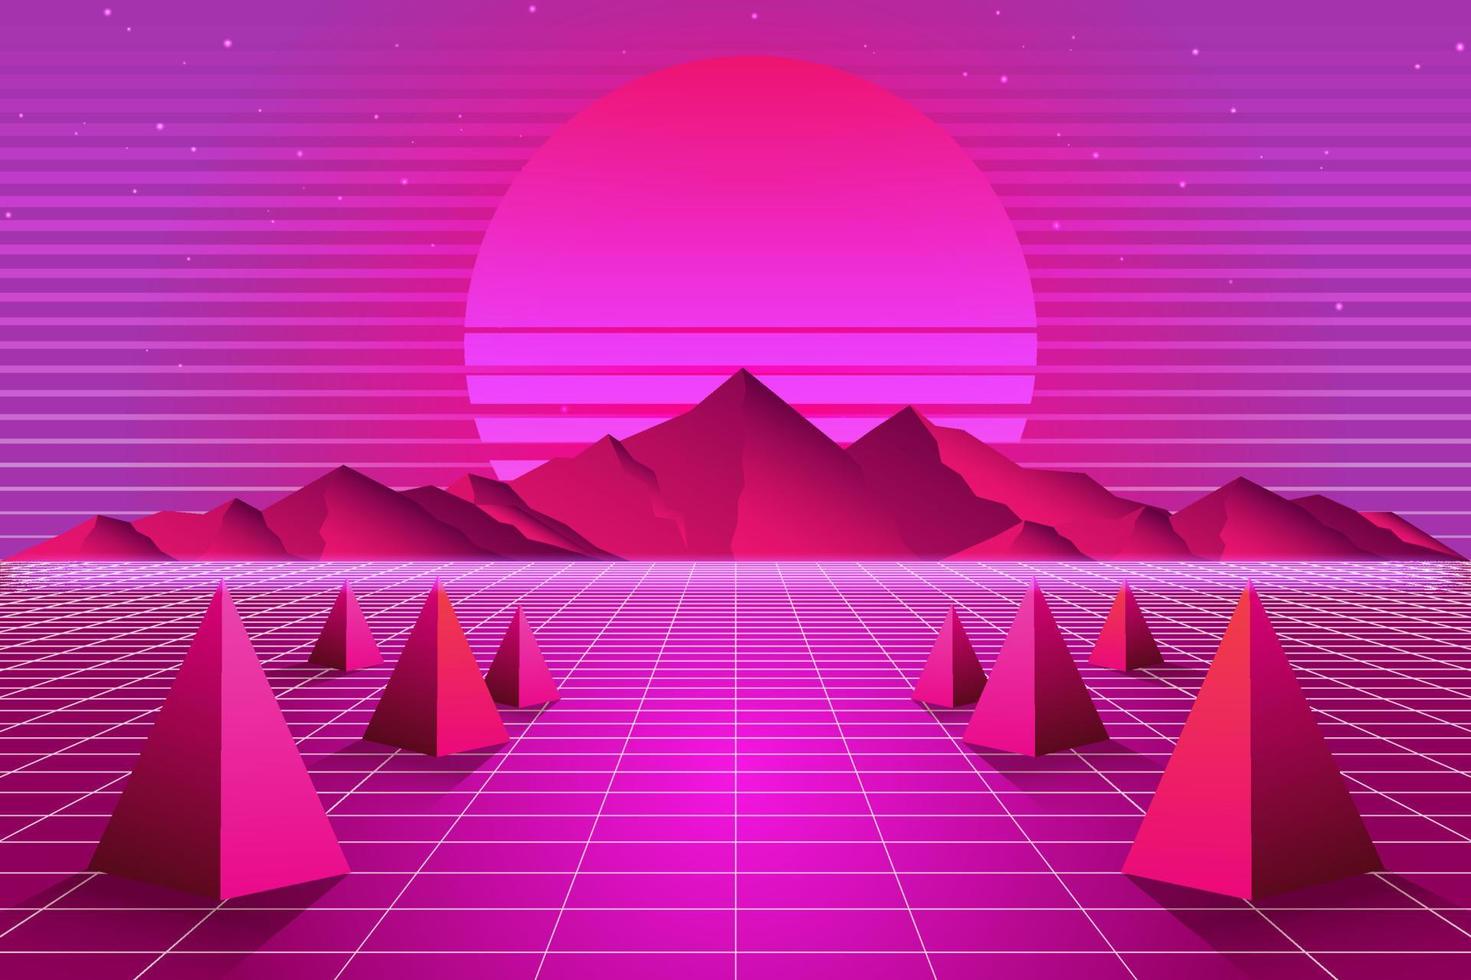 Retro Sci-Fi futuristic background 1980s and 1990s style 3d illustration. Digital landscape in a cyber world. For use as design cover vector